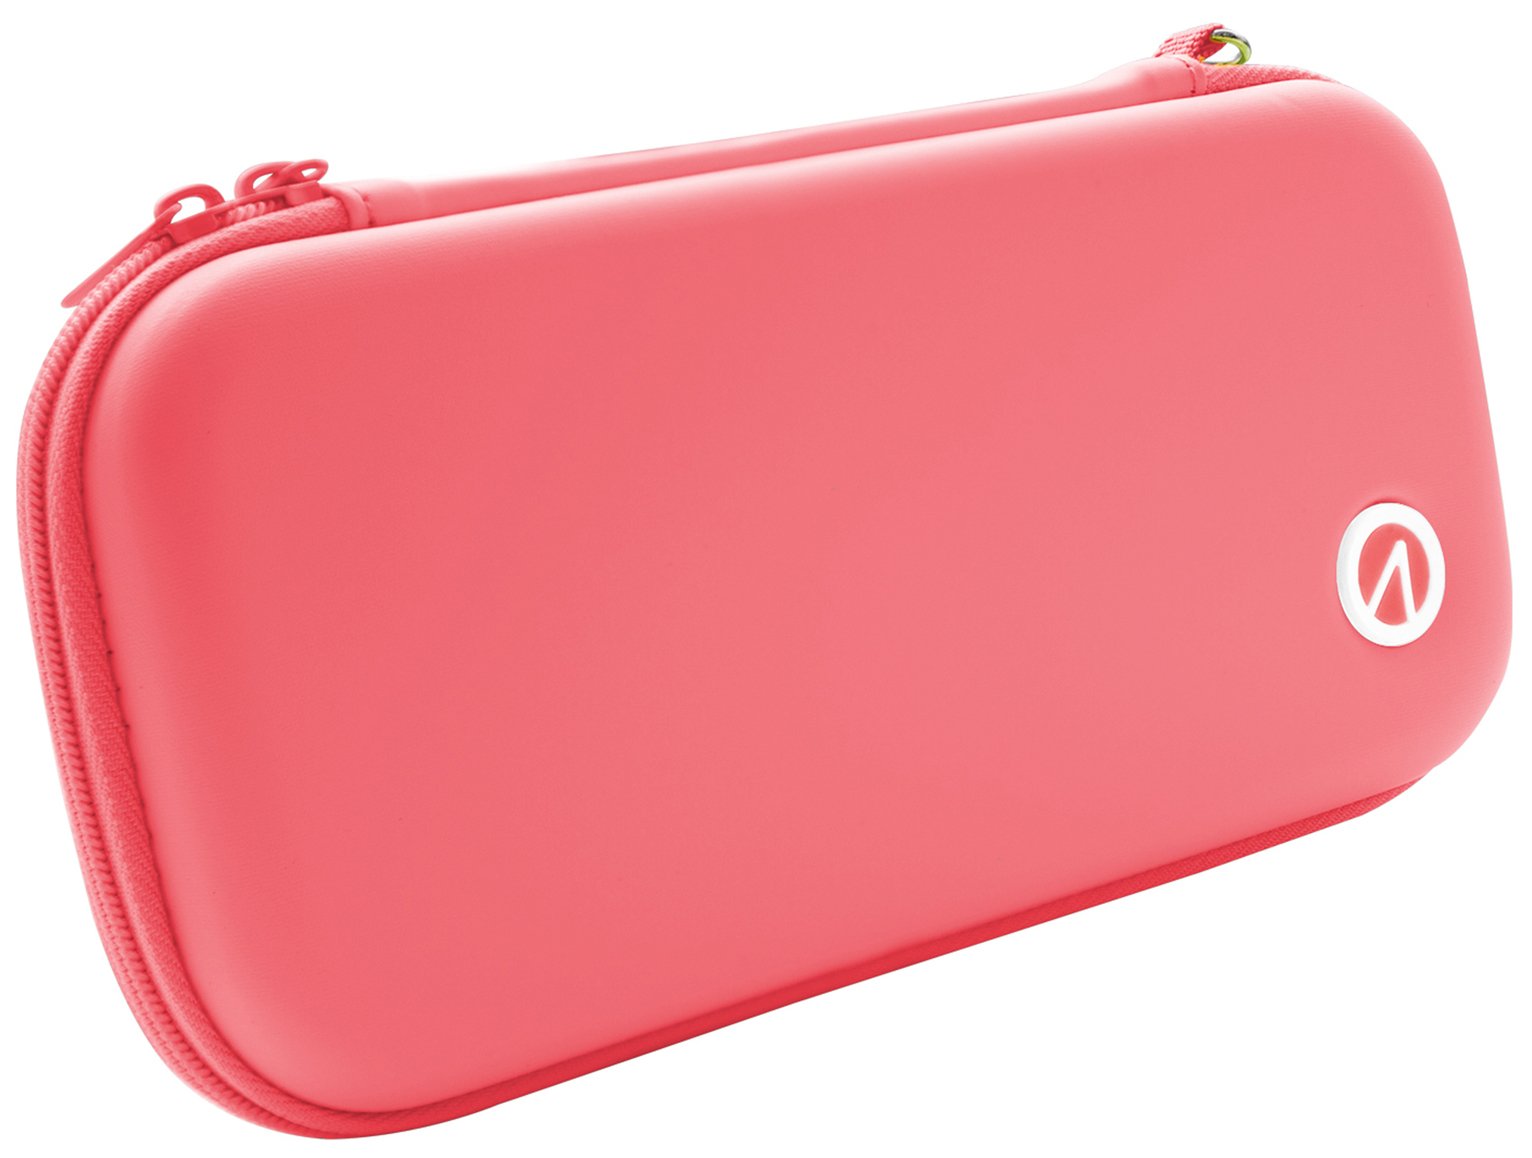 STEALTH Nintendo Switch Lite Travel Case Review